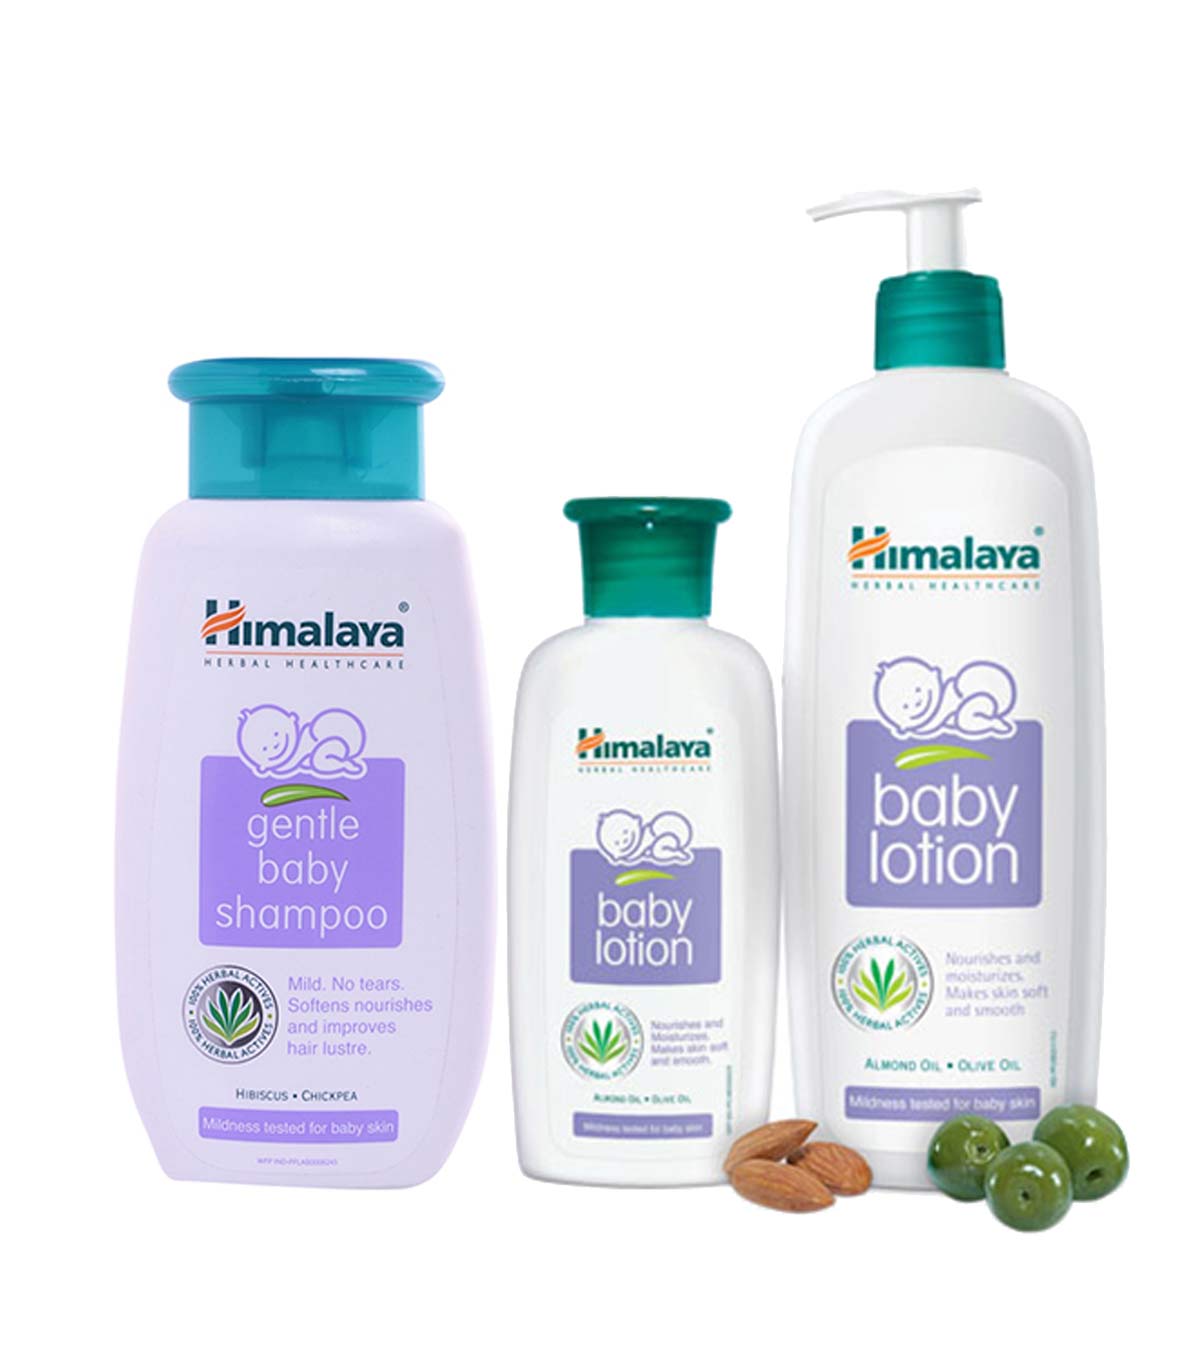 Can Himalaya Baby Lotion Be Used On Face